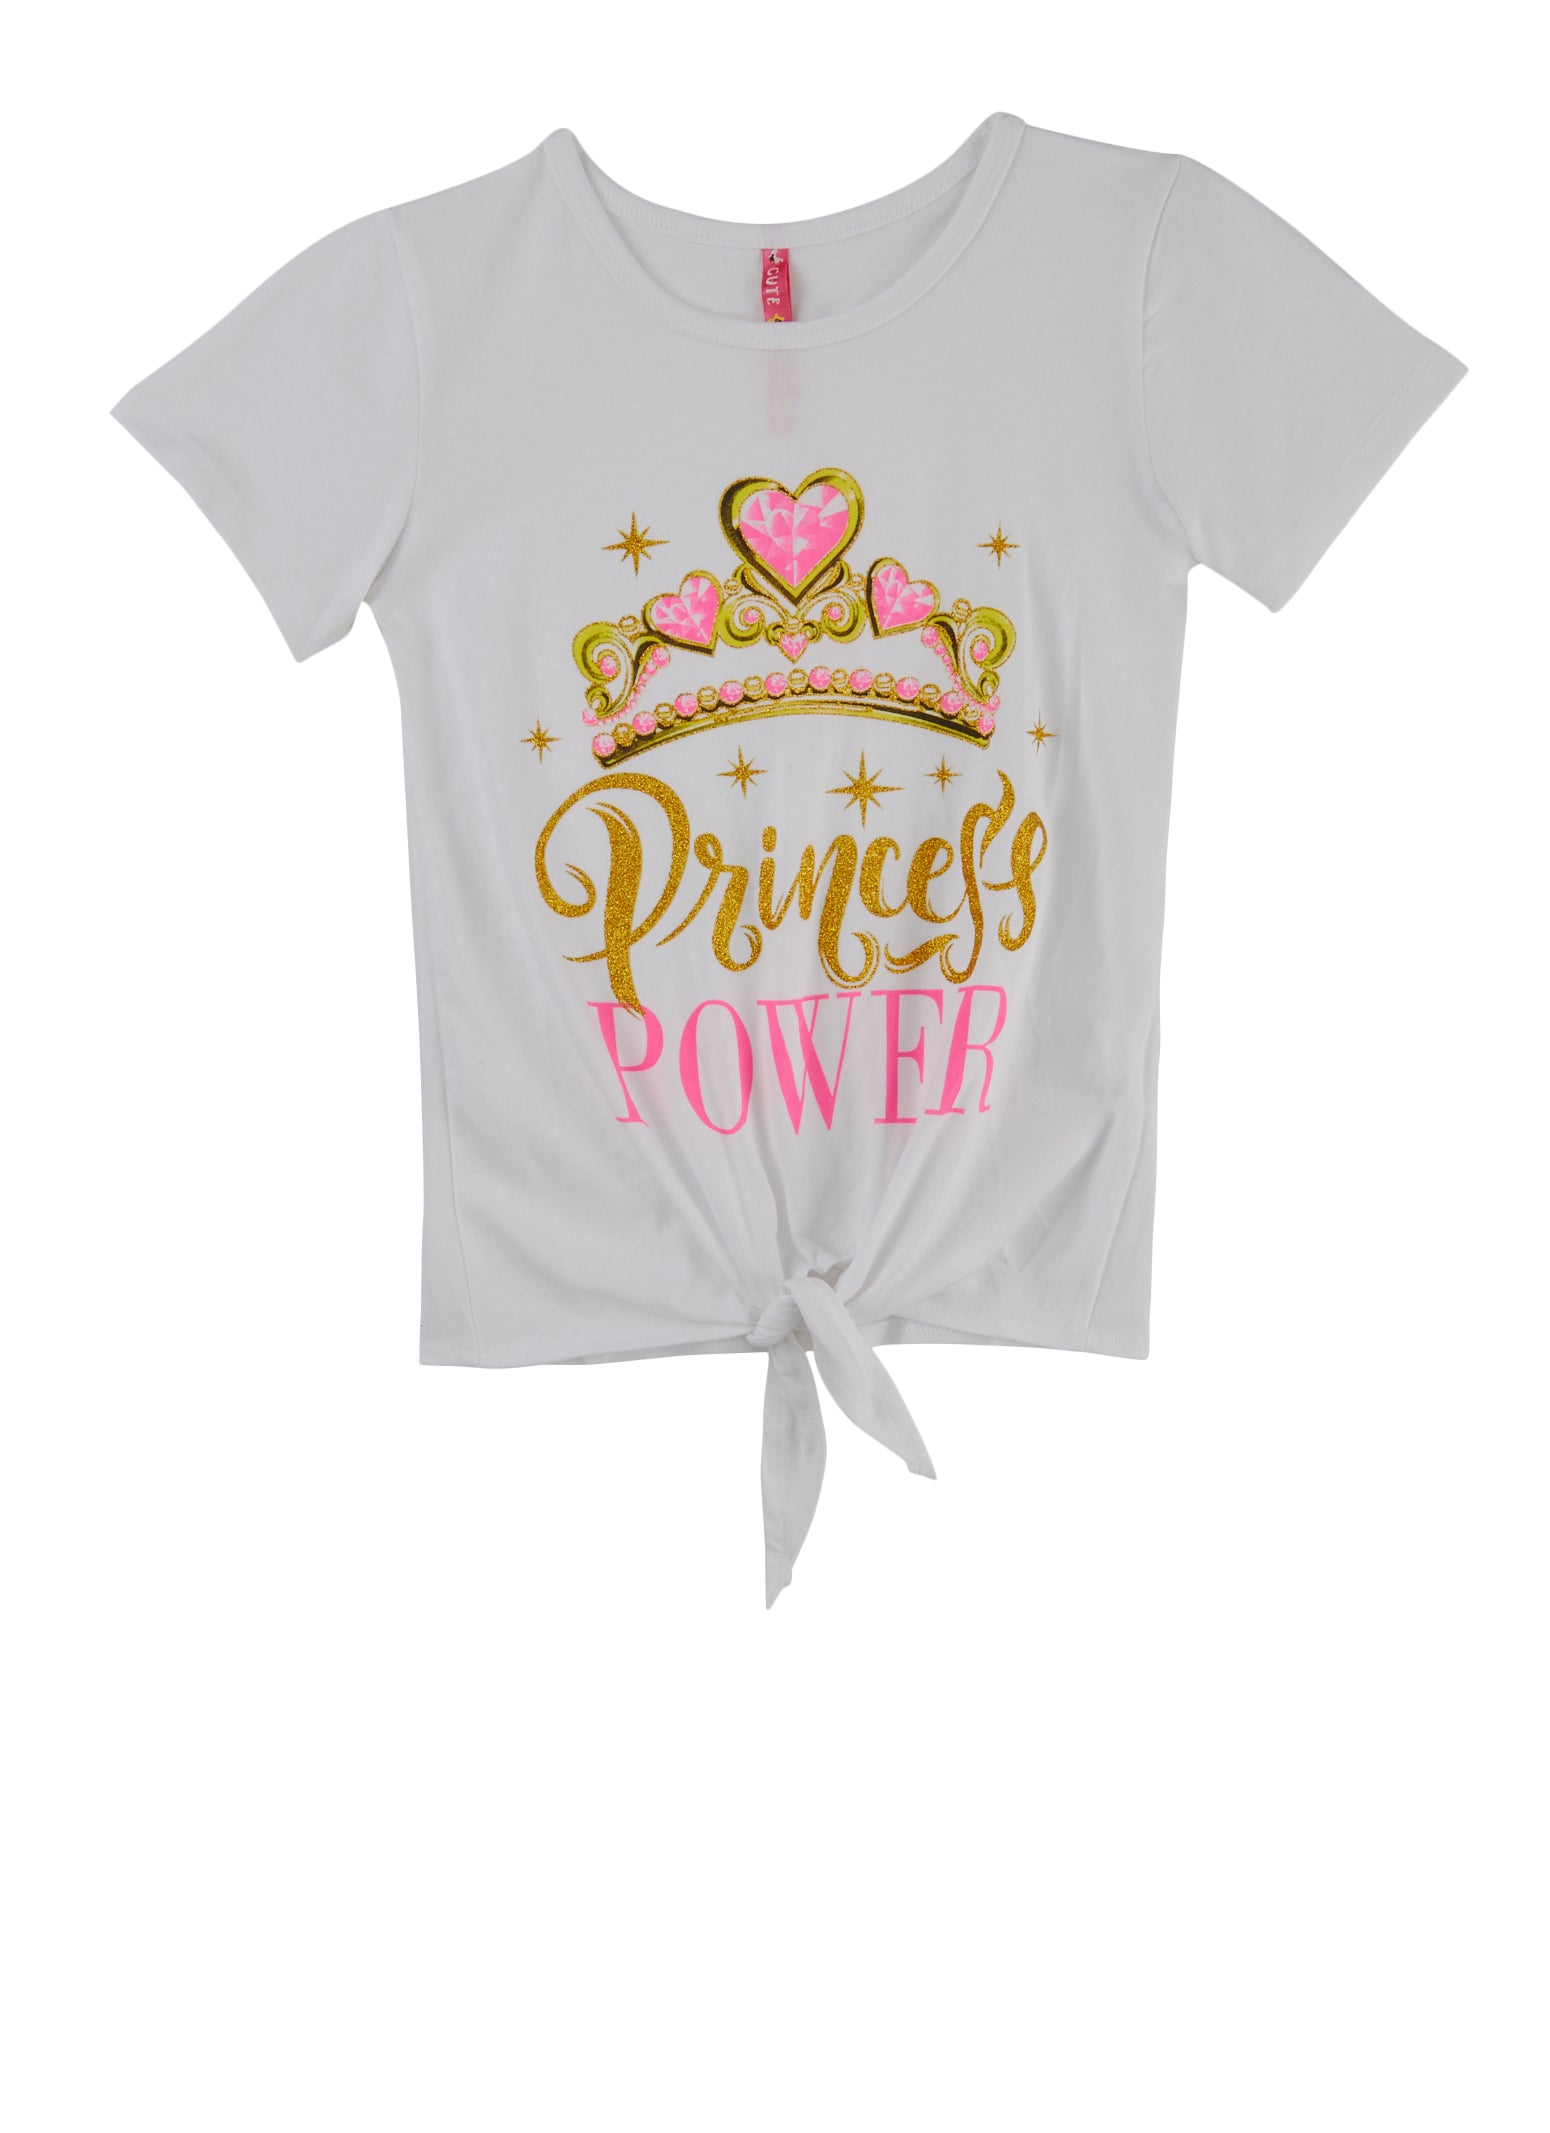 Girls Princess Power Tie Front Glitter Graphic Tee, White, Size 14-16